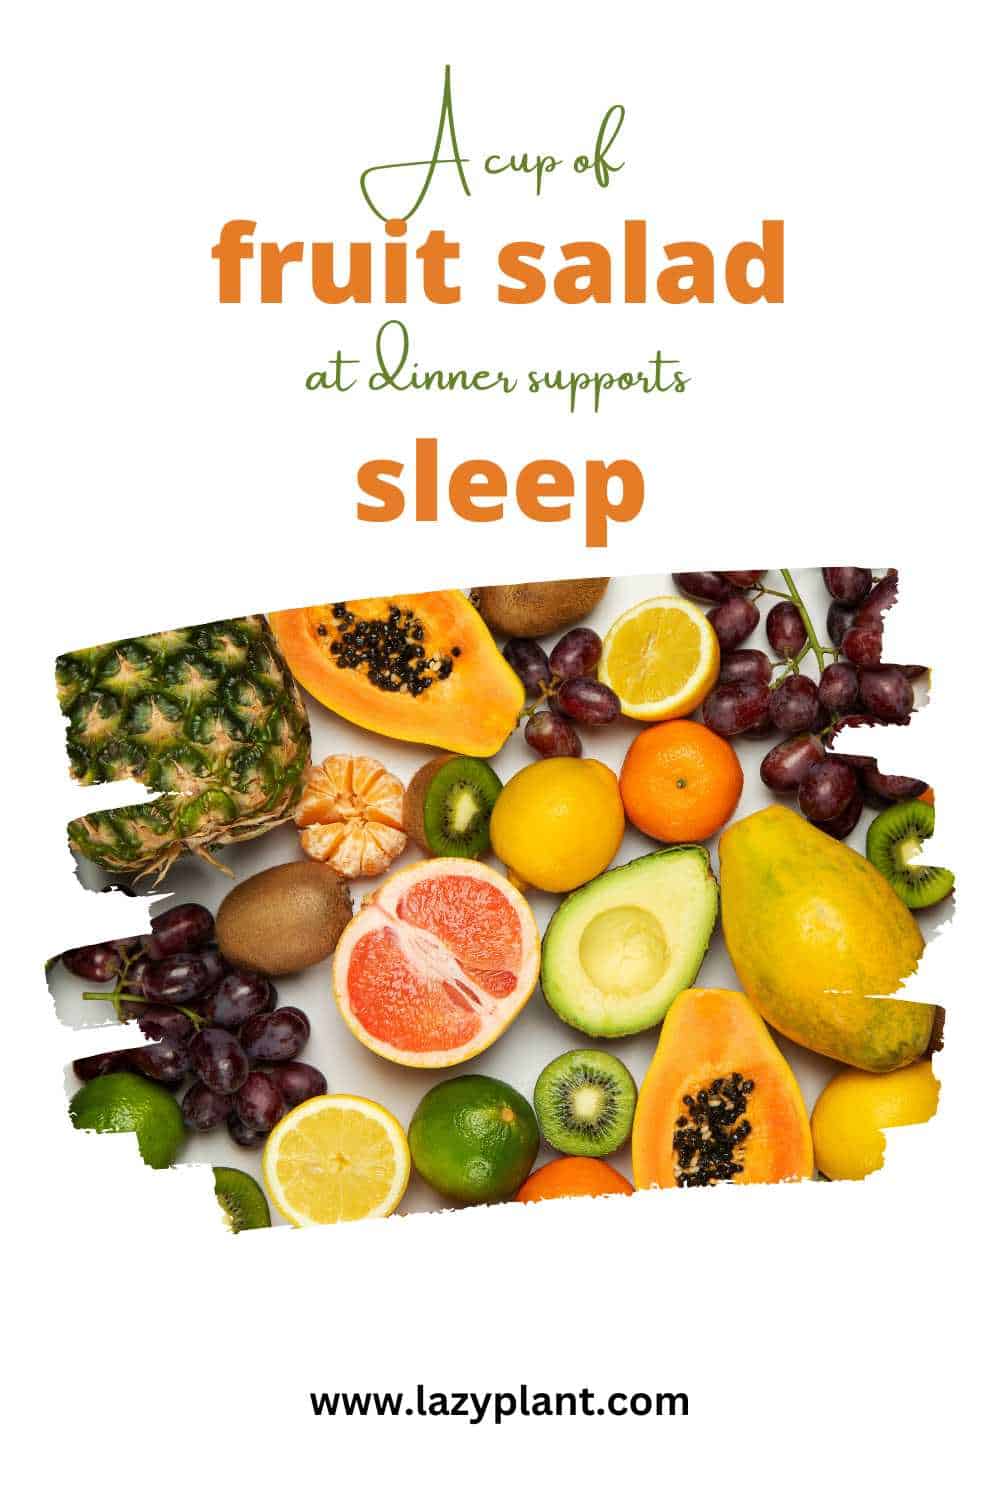 8 tips to prepare the ultimate fruit salad for sleep.